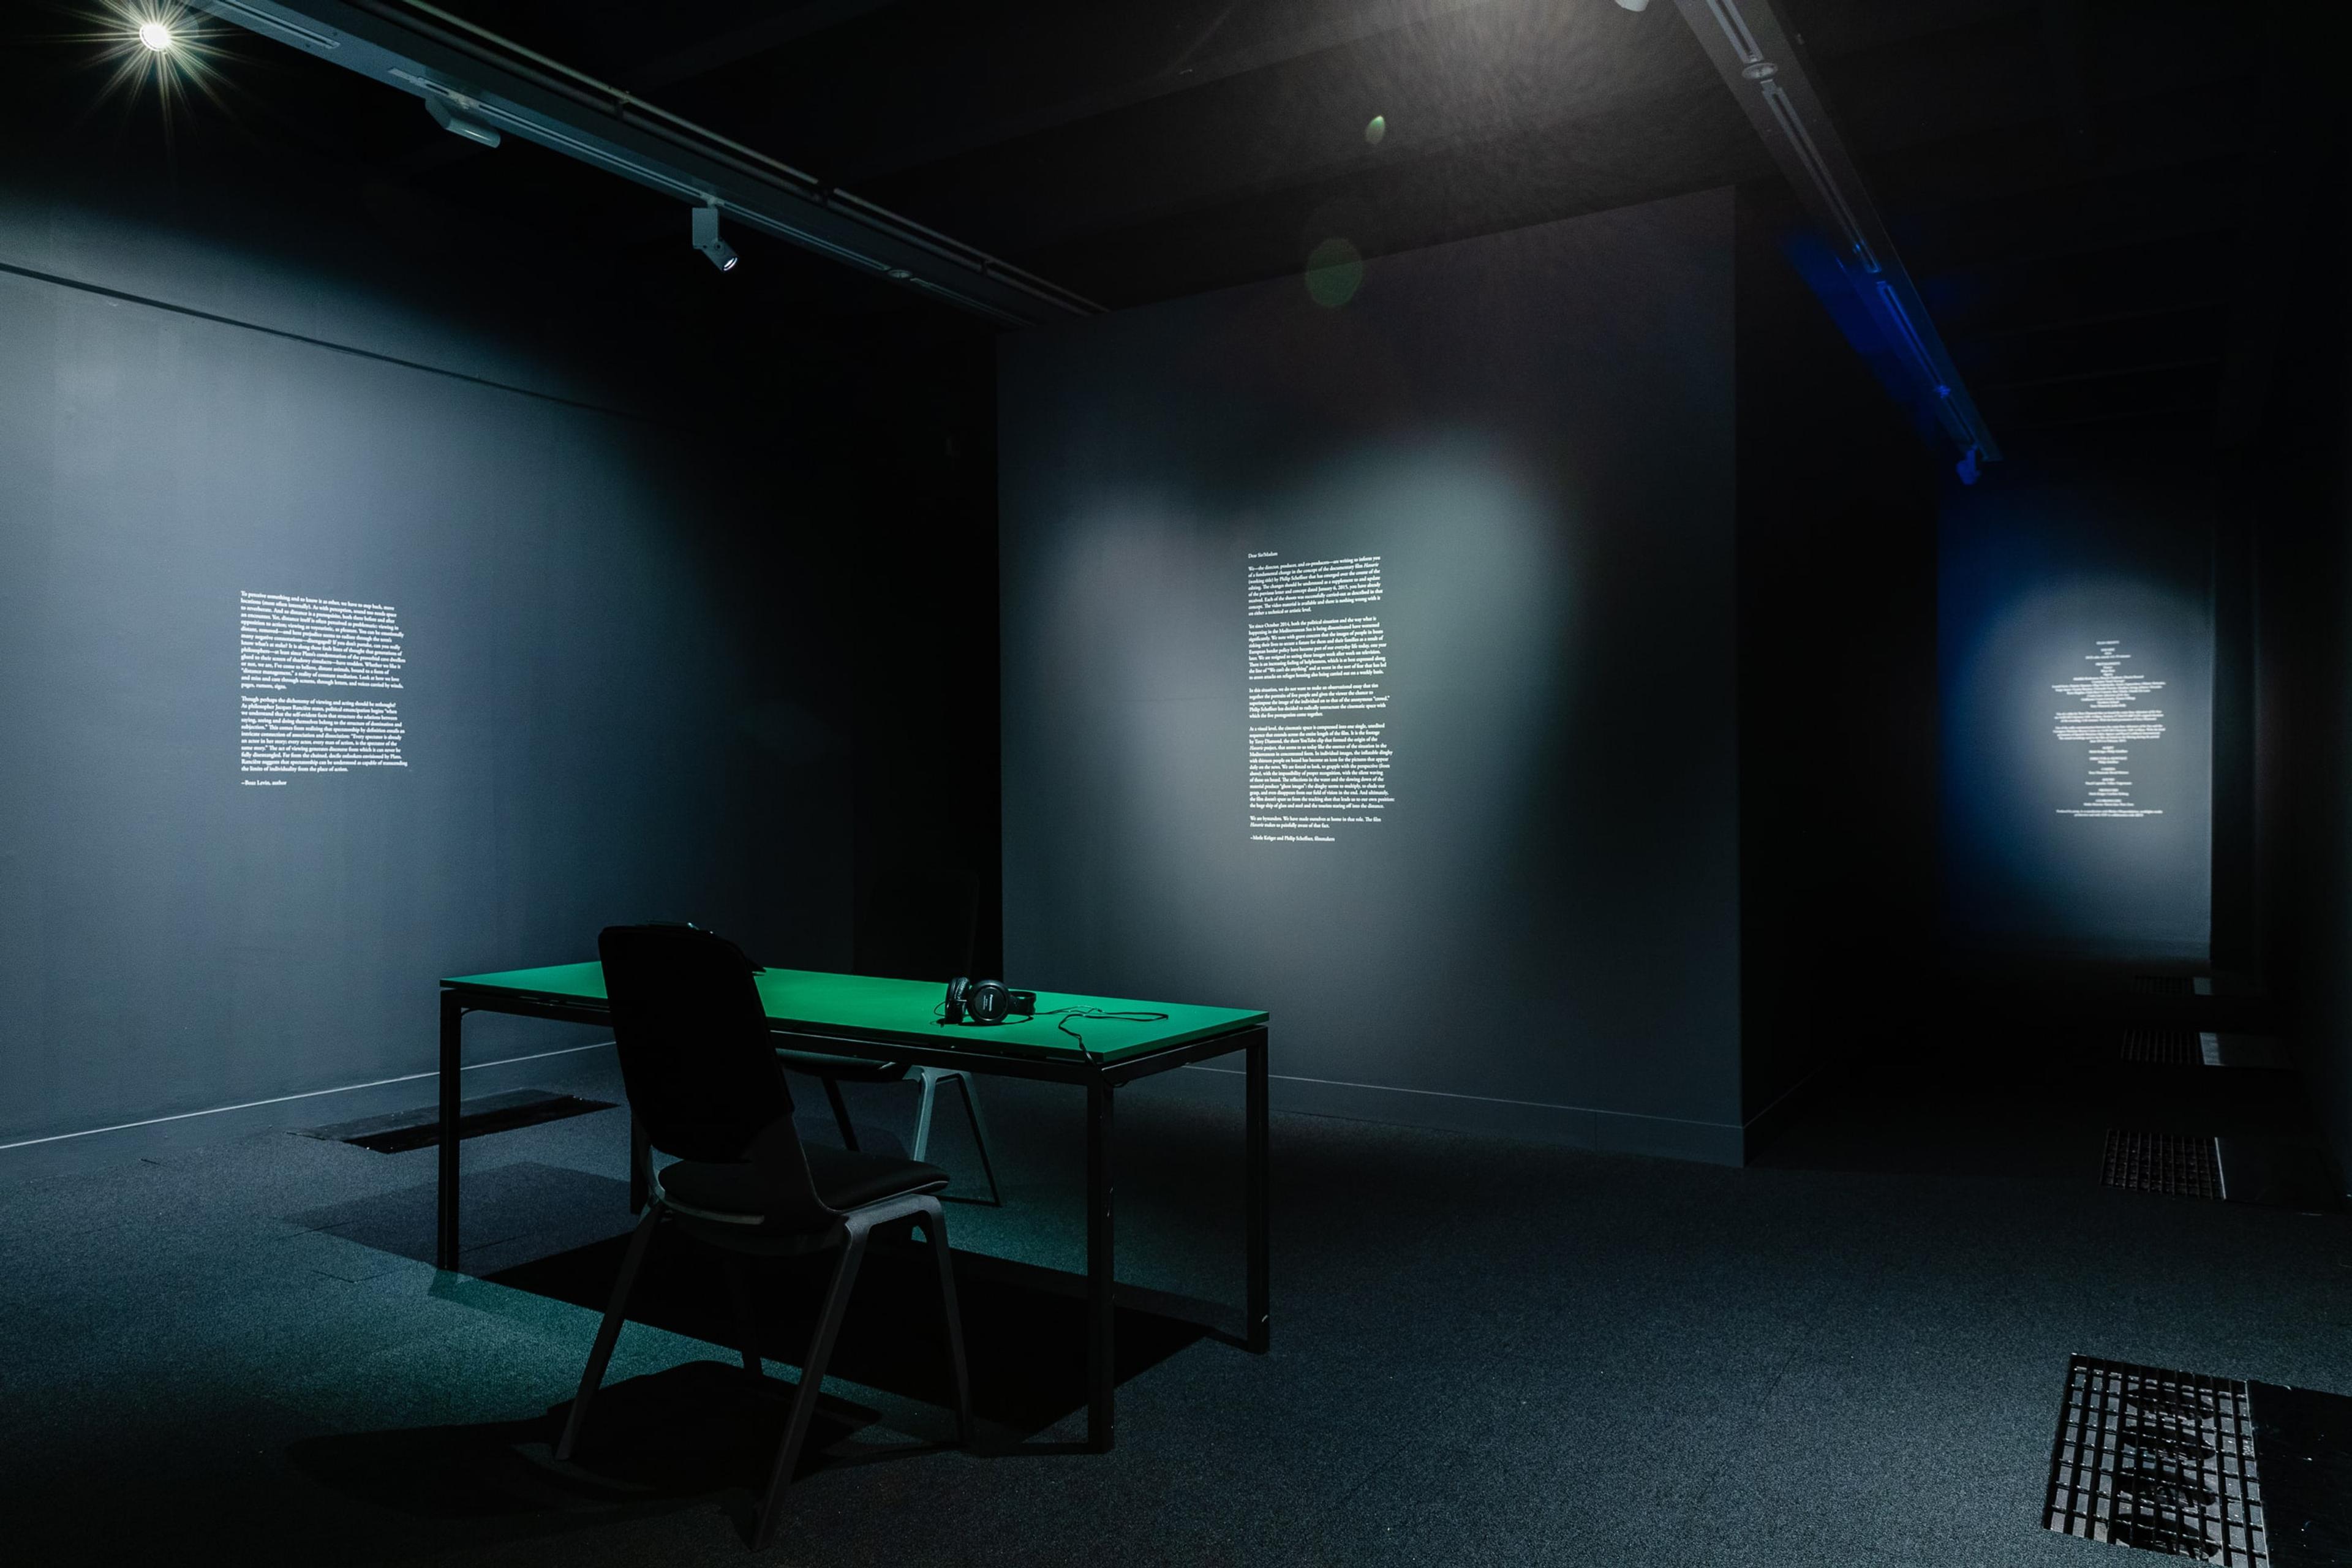 a dark room with black walls, with blocks of small white text spot-lit on the walls. A desk and chair sit in the middle of the room.